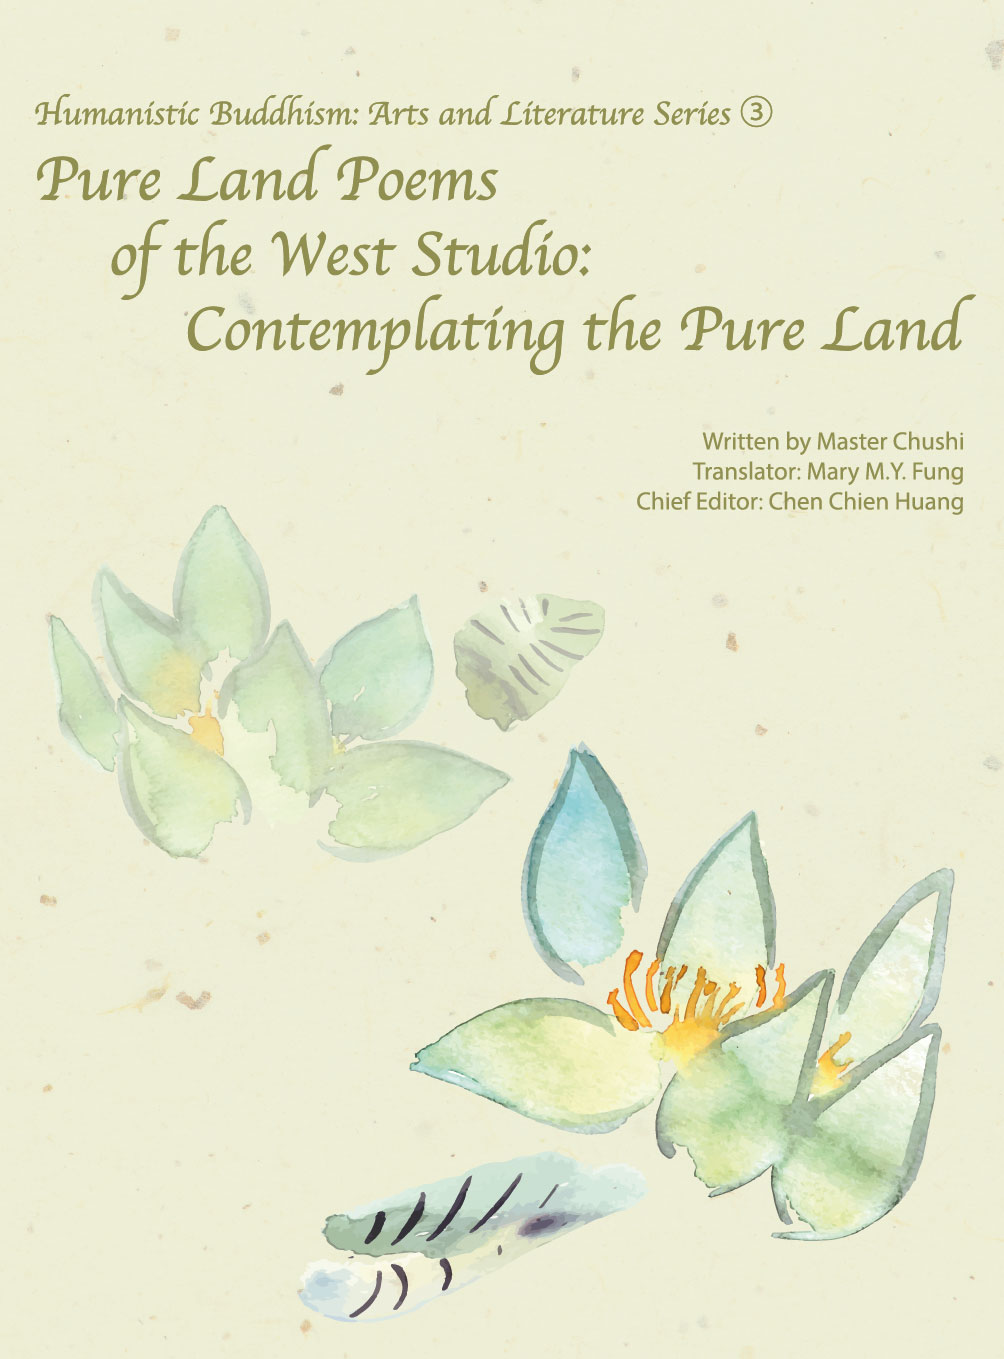 (3) Pure Land Poems of the West Studio: Contemplating the Pure Land